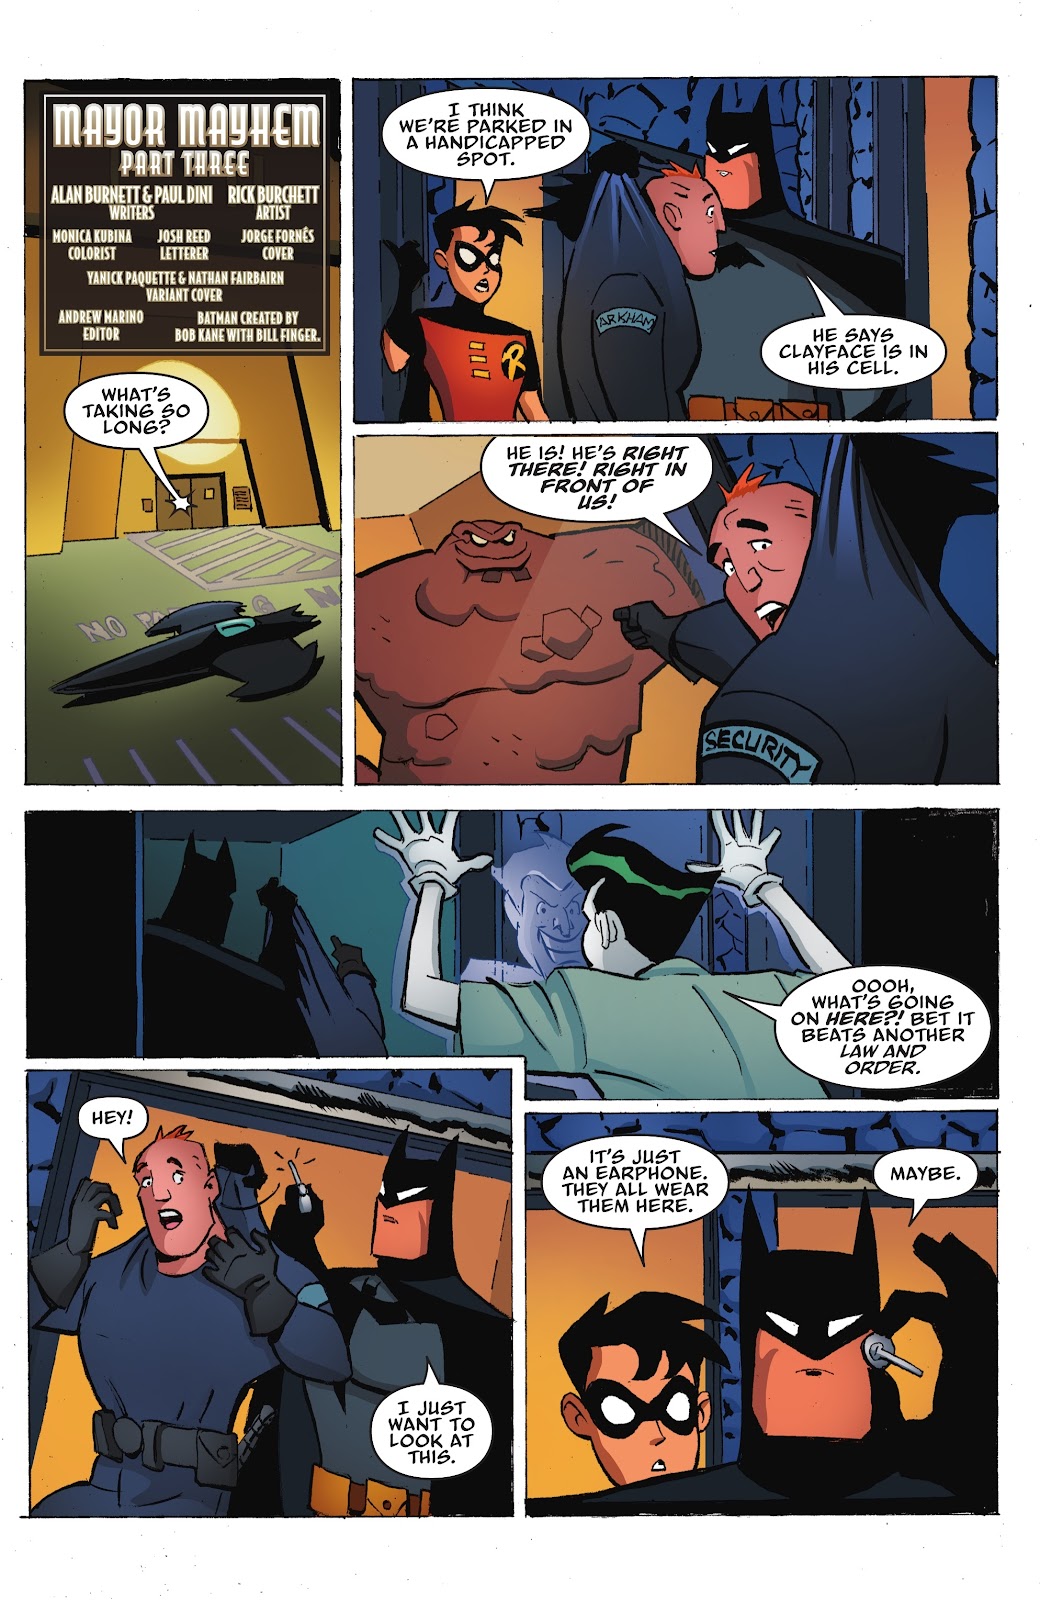 Batman: The Adventures Continue: Season Two issue 7 - Page 5